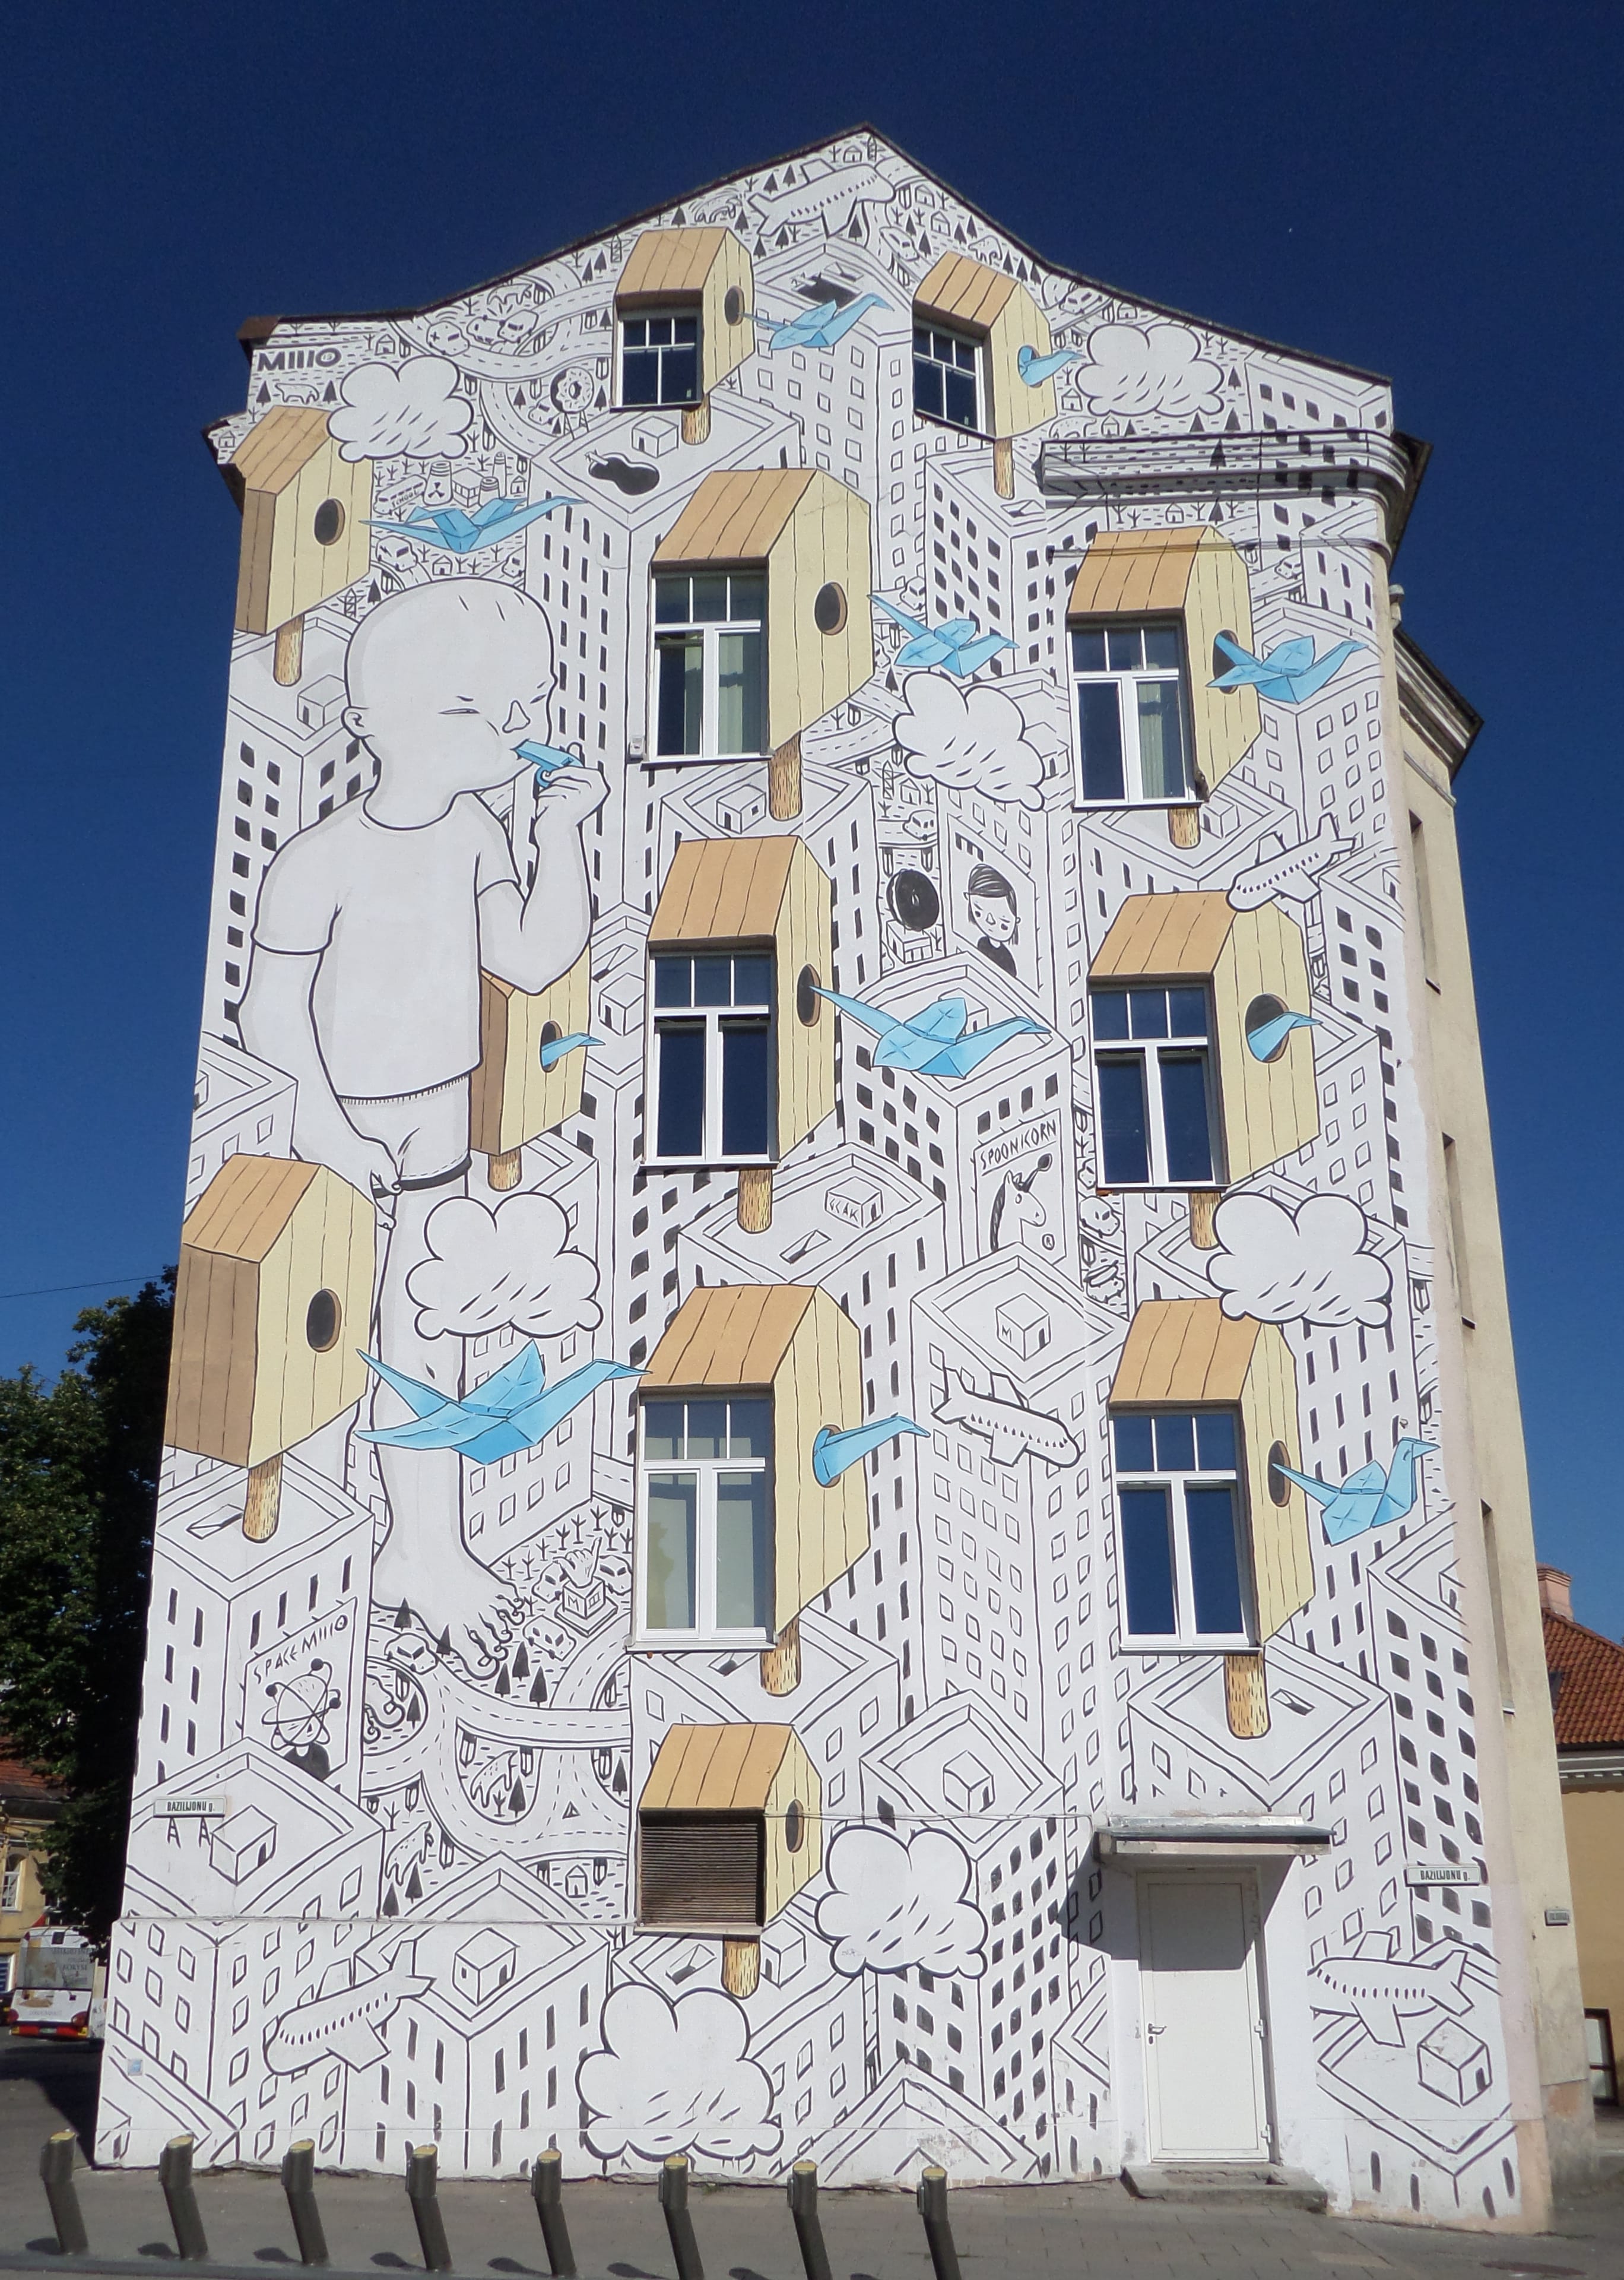 Graffiti 6489  by the artist Millo captured by Mephisroth in Vilnius Lithuania